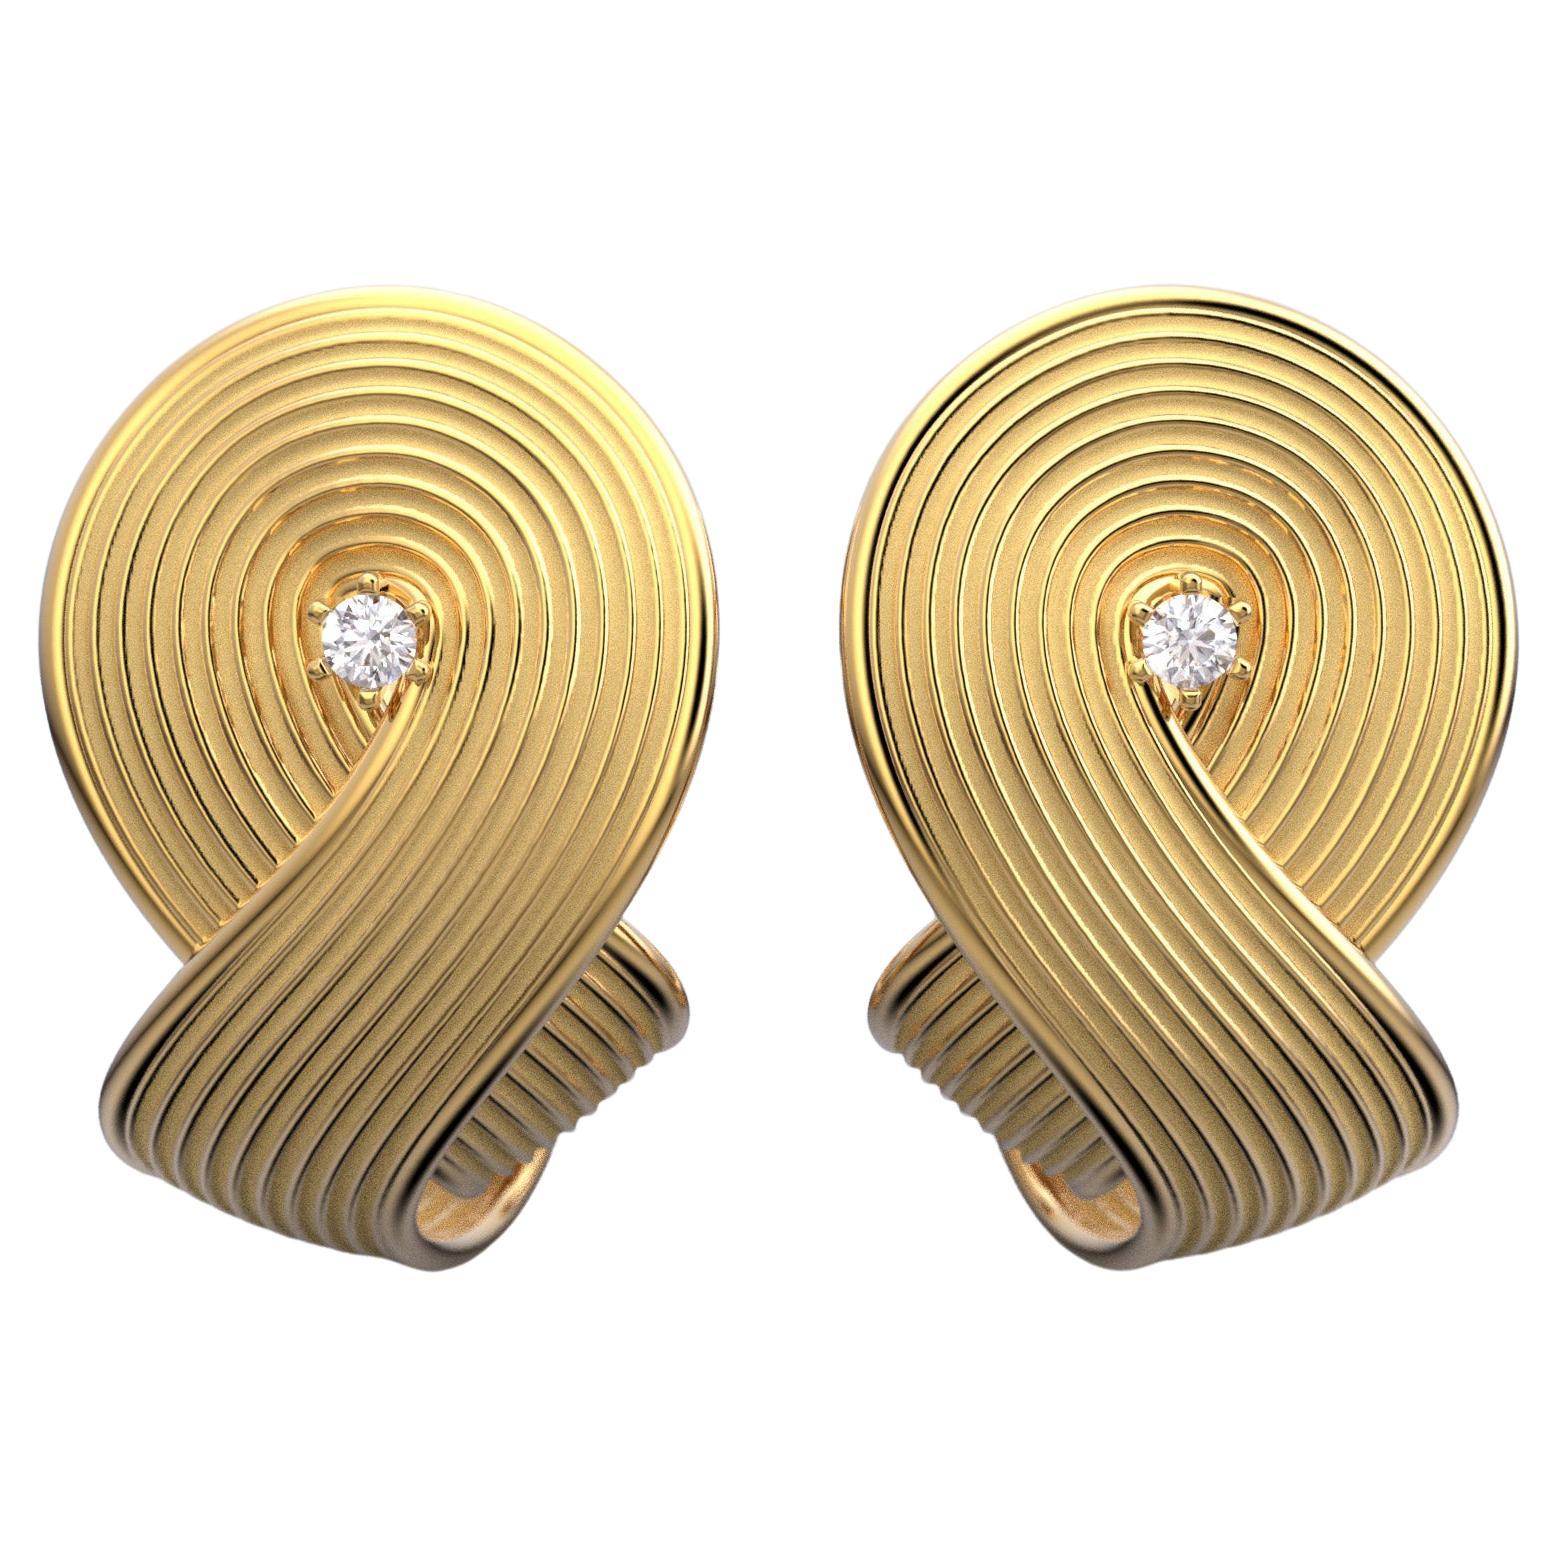 Oltremare Gioielli Statement Earrings in 18k Gold and Diamonds, made in Italy. For Sale